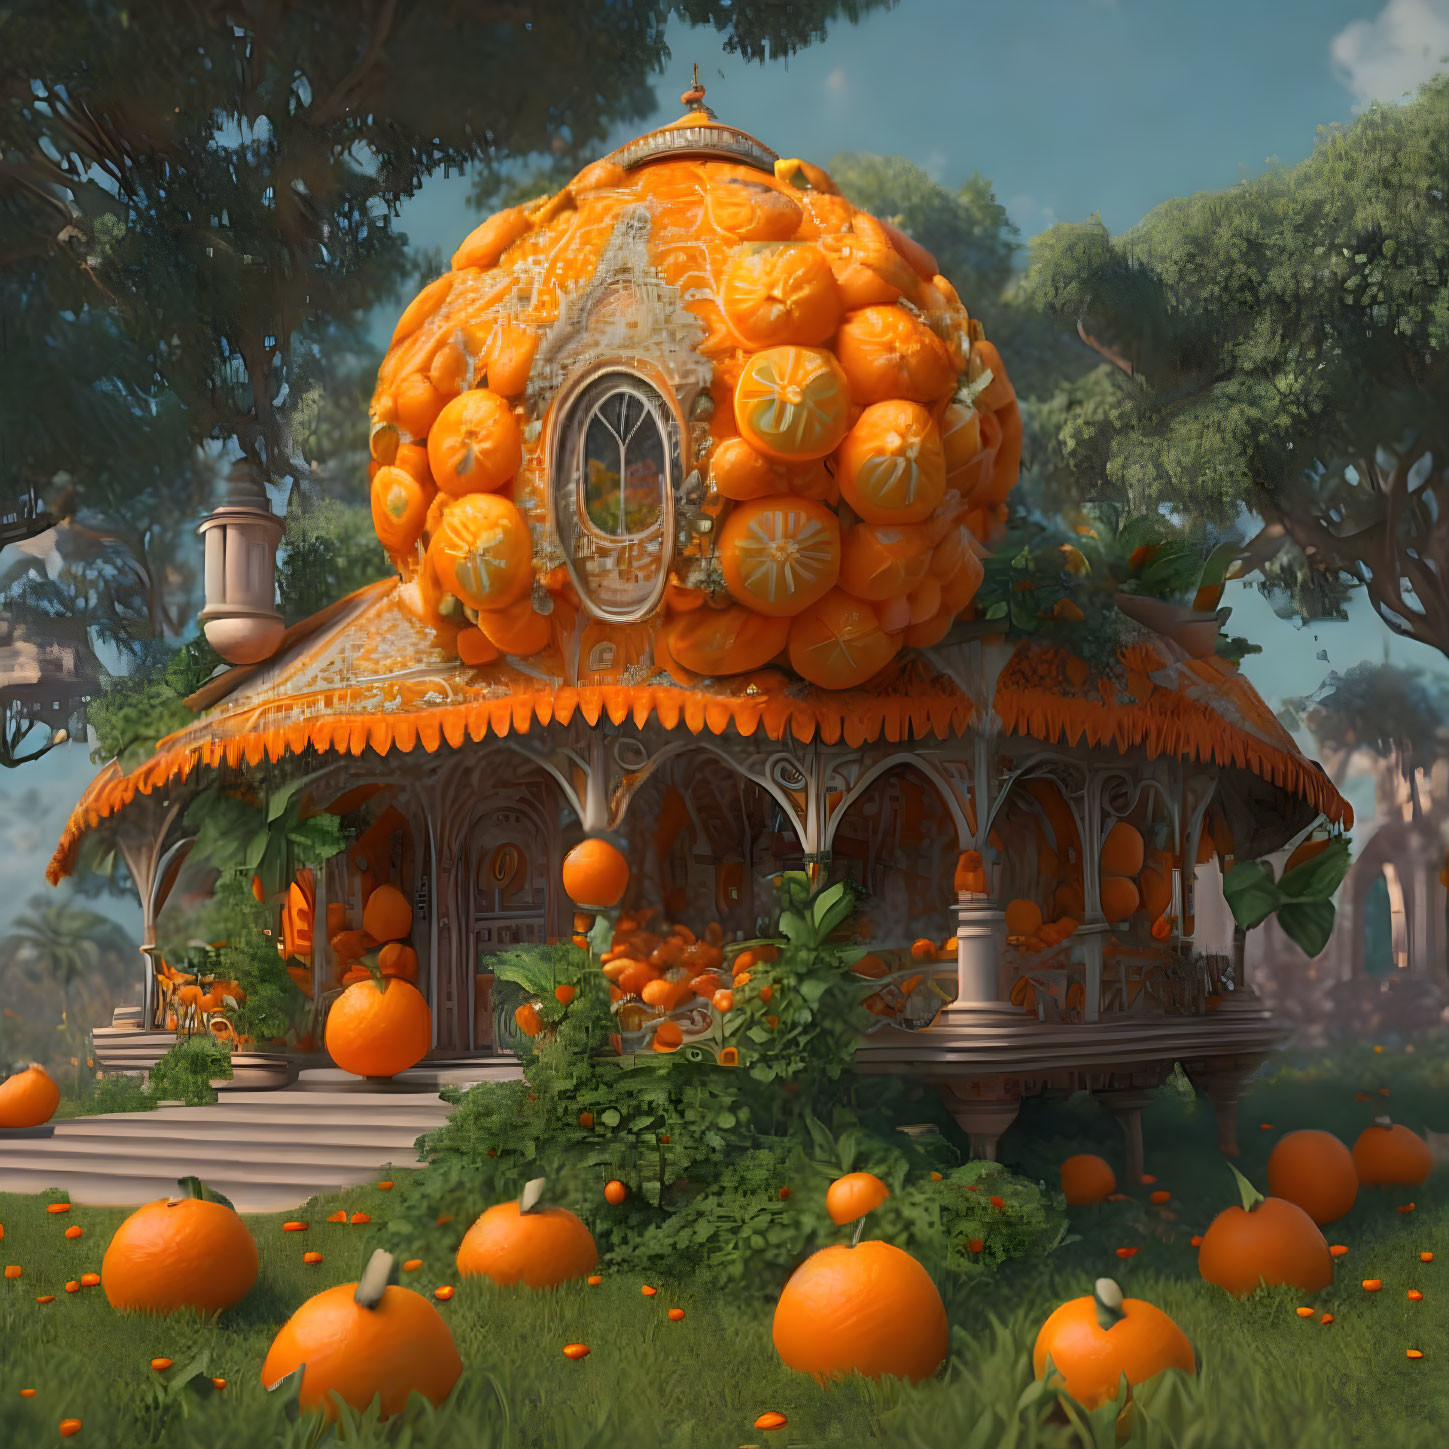 Orange-themed Pavilion with Fruit Decor in Enchanting Forest Clearing